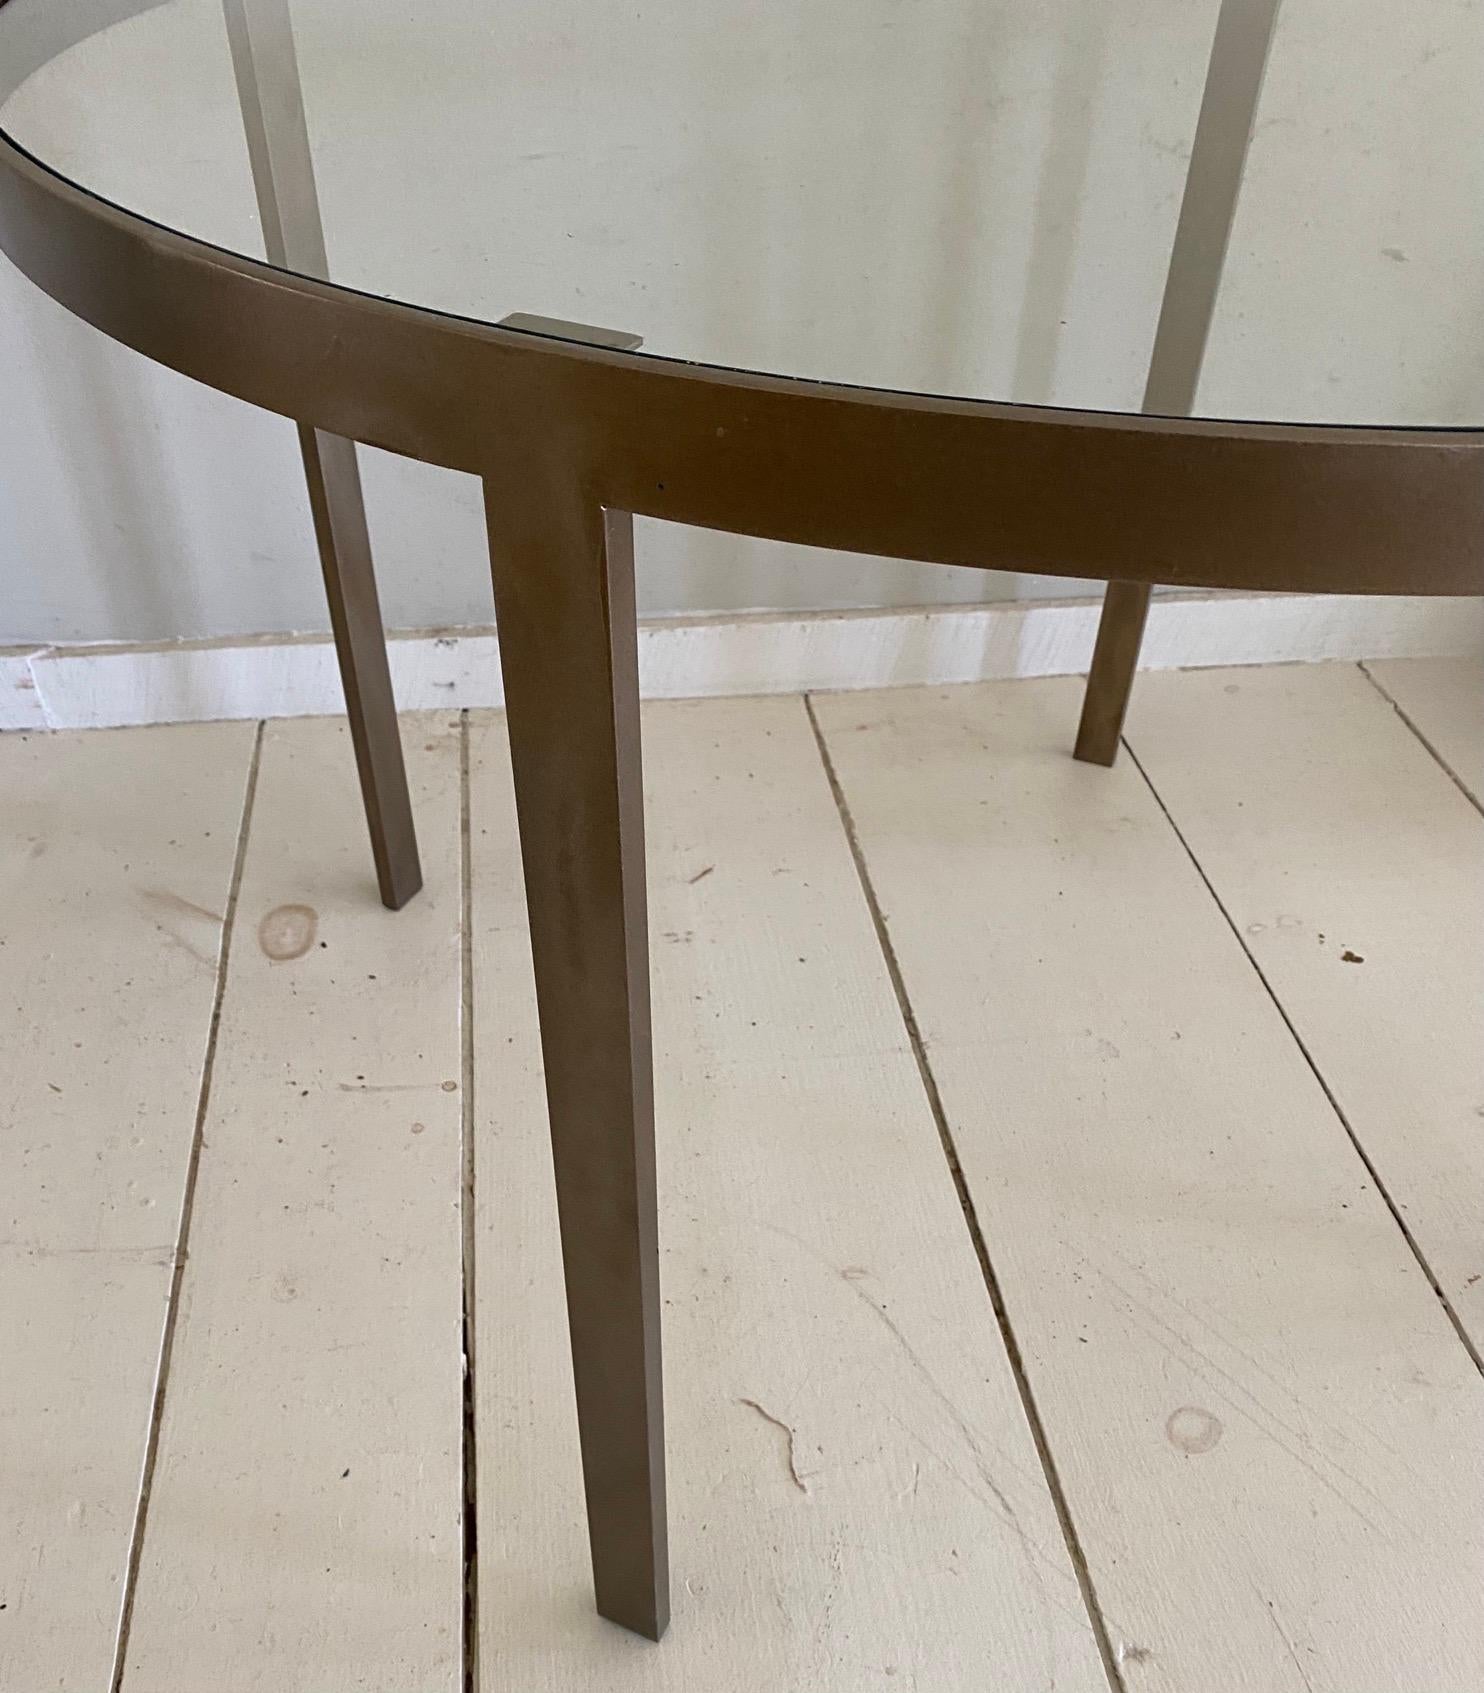 round metal top dining table